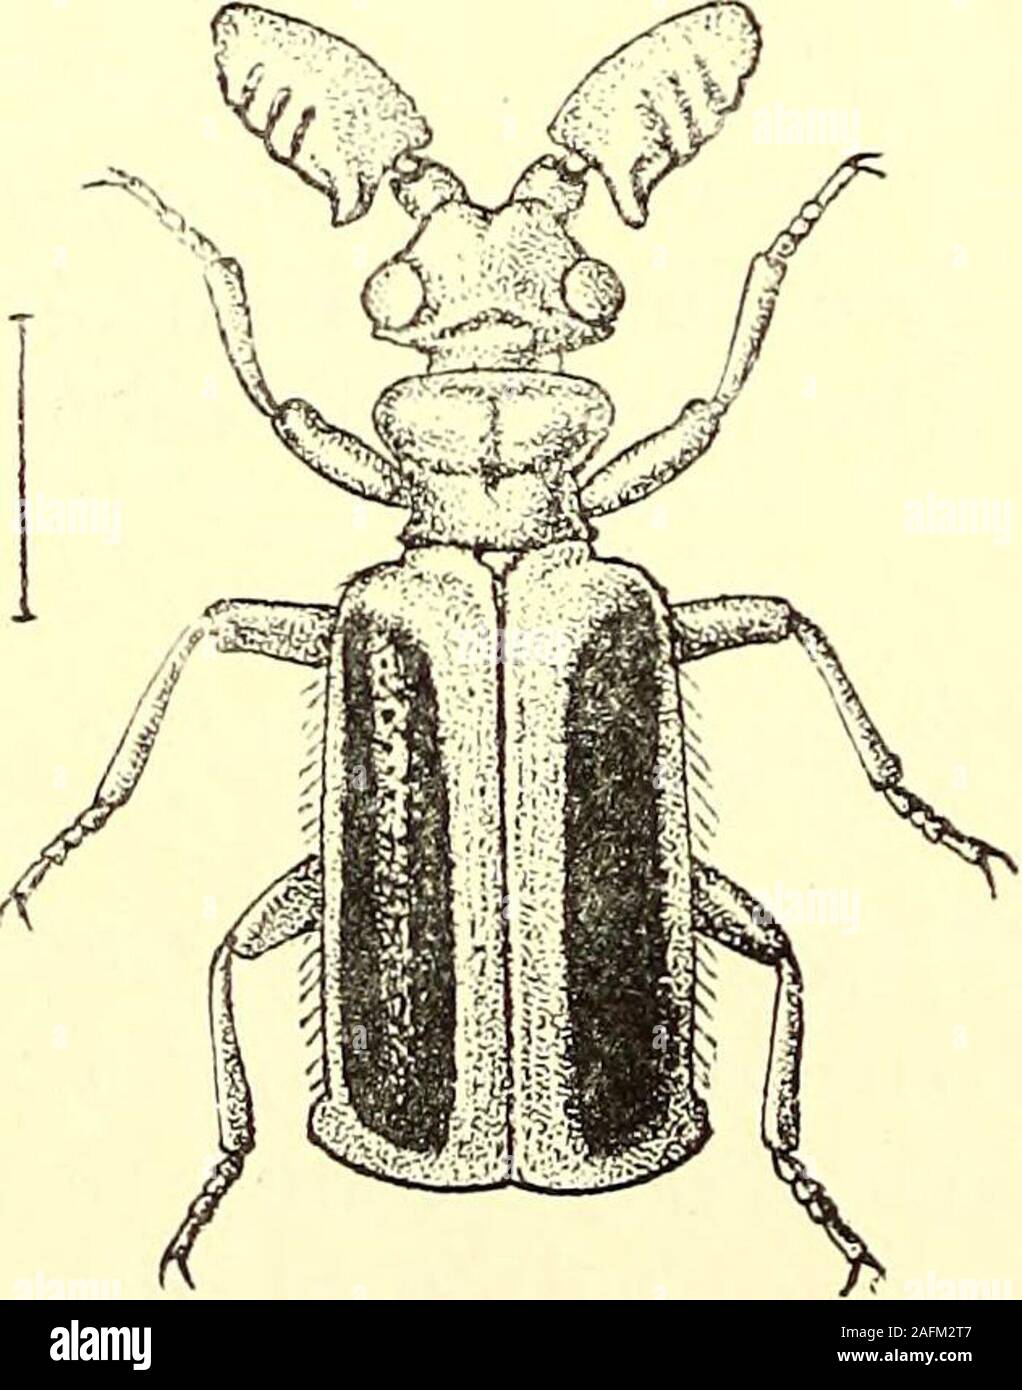 . Coleoptera : general introduction and Cicindelidae and Paussidae. 218. schtotUci 243. Paussus hearseyanus, Westw.. Fig. 219. Paussus hearseyanus. Paussus hearseyanus, Westwood, Proc. Linn. Soc. Loud. 1842, 133 Arcan. Ent. ii, 1845, p. 189, pi. 94,fig. 4; Wasmann, Notes Leyden Mus.xxi, 1899, p. 37, pi. 3, fig. 3.Paussus hearseyanus var. parvicornis,Wasmann, op. cit. xxv, 1904, p. 76. Of a more or less bright fulvo-casta-neous colour, with the disc of each elytronblack; head large, distinctly broaderthan long, with a transverse keel behindthe eyes, which is slightly angled in thecentre; clypeu Stock Photo